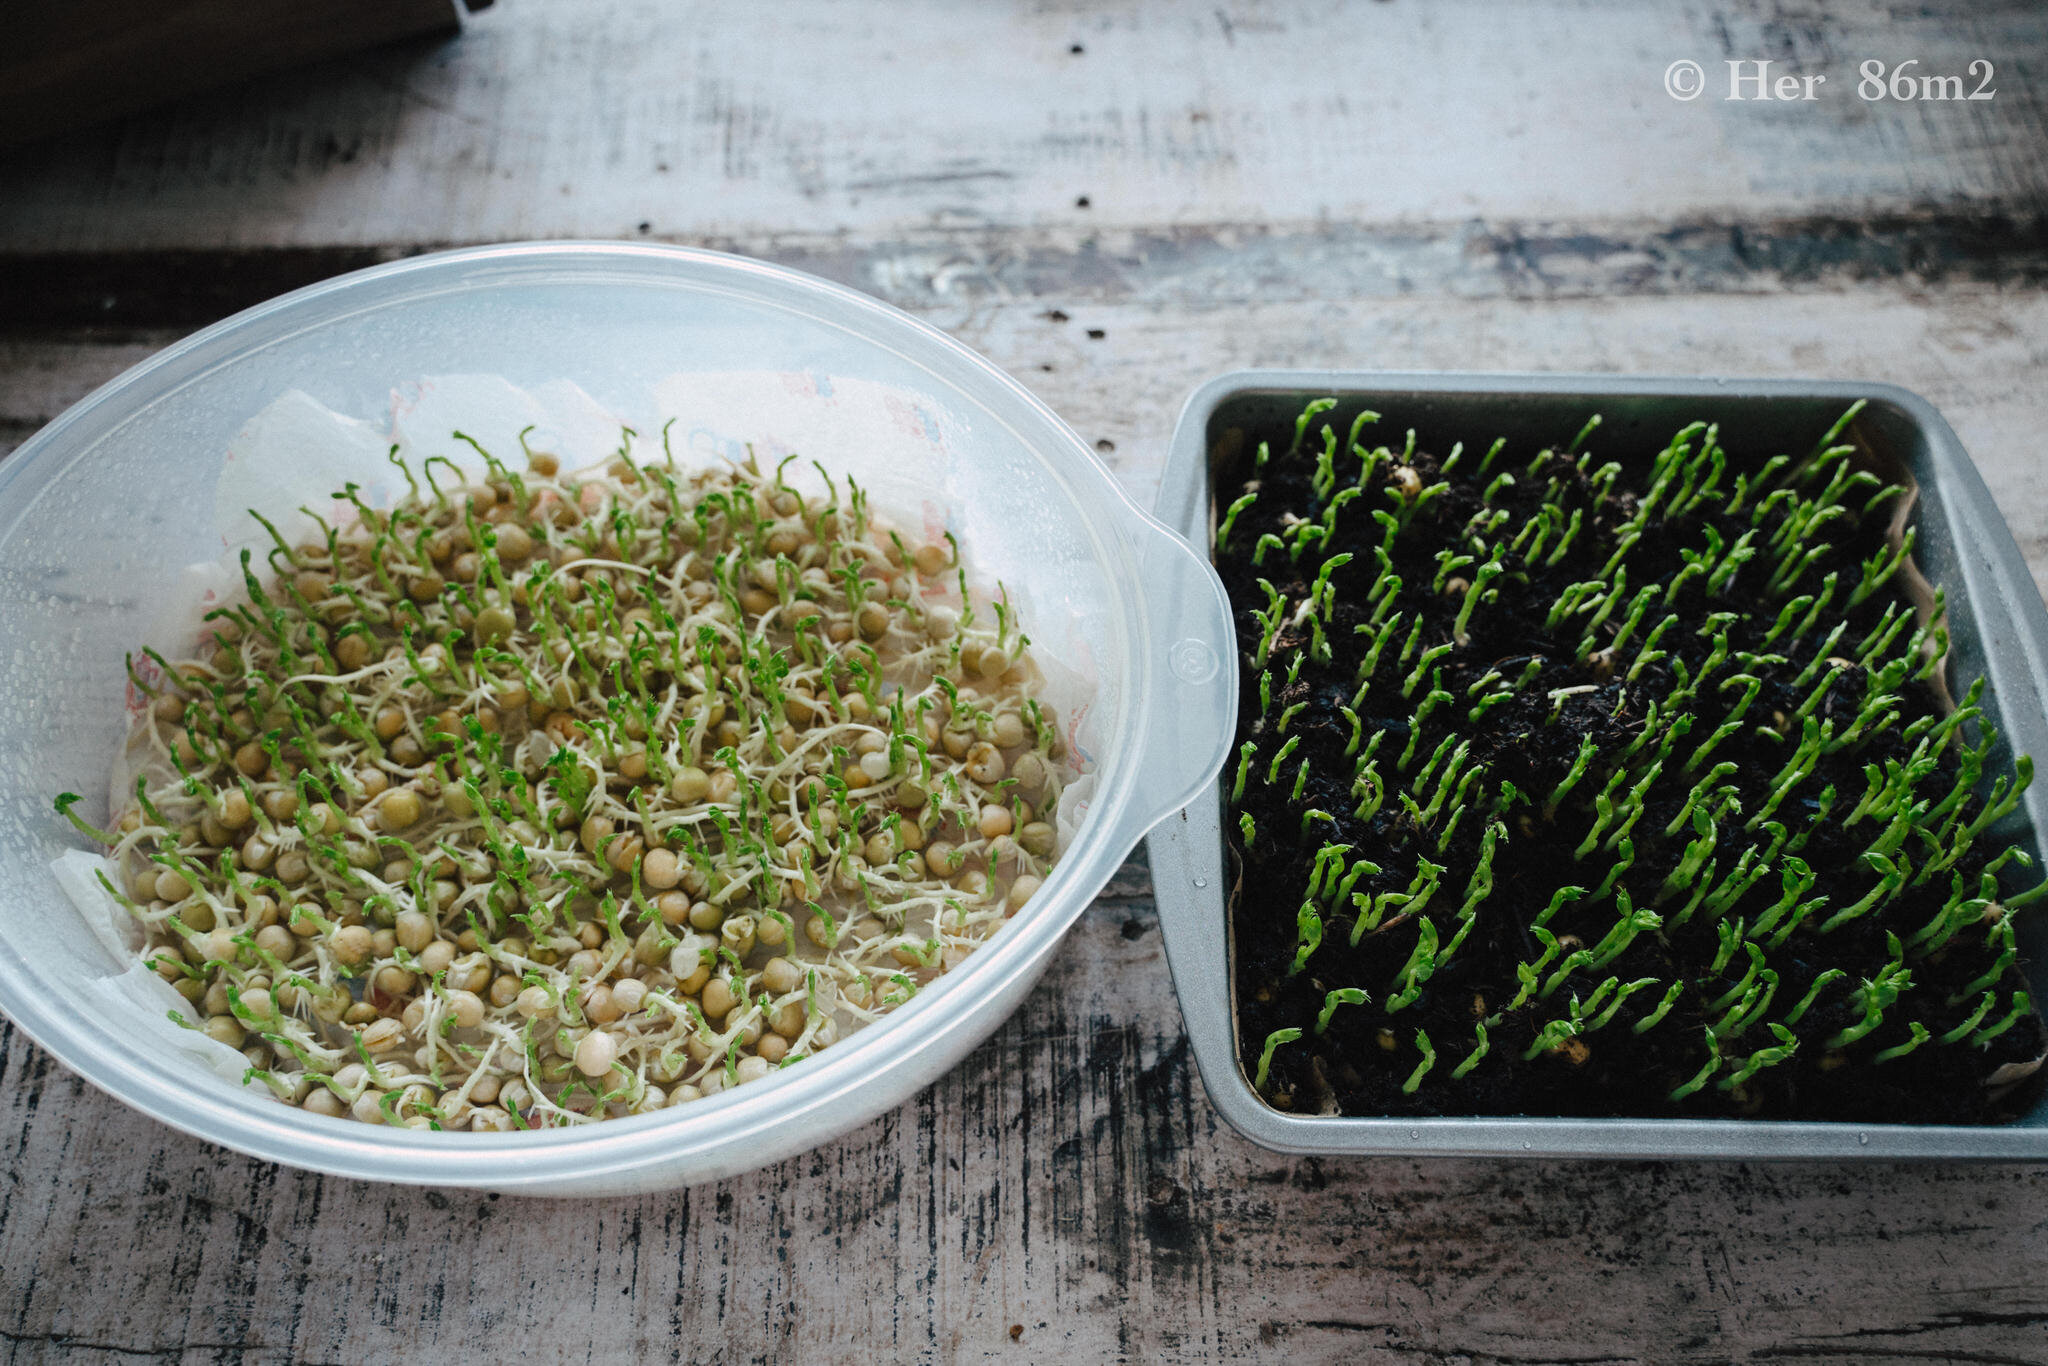 Grow Vegetables Indoors - Microgreens & Sprouts - From Seed to Harvest 53.JPG